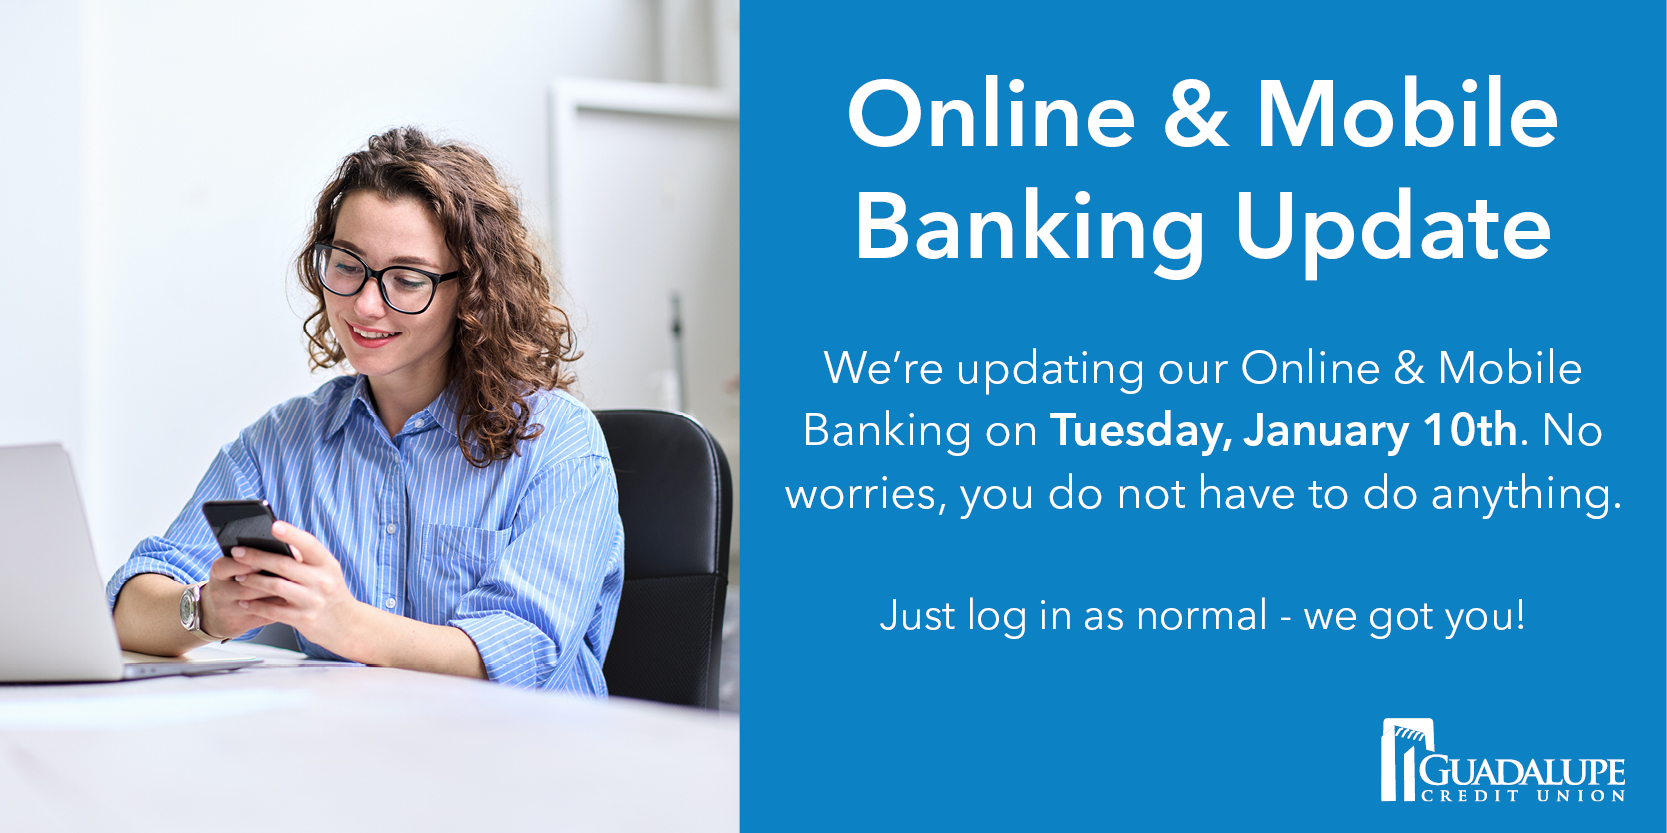 Online & Mobile Banking Update